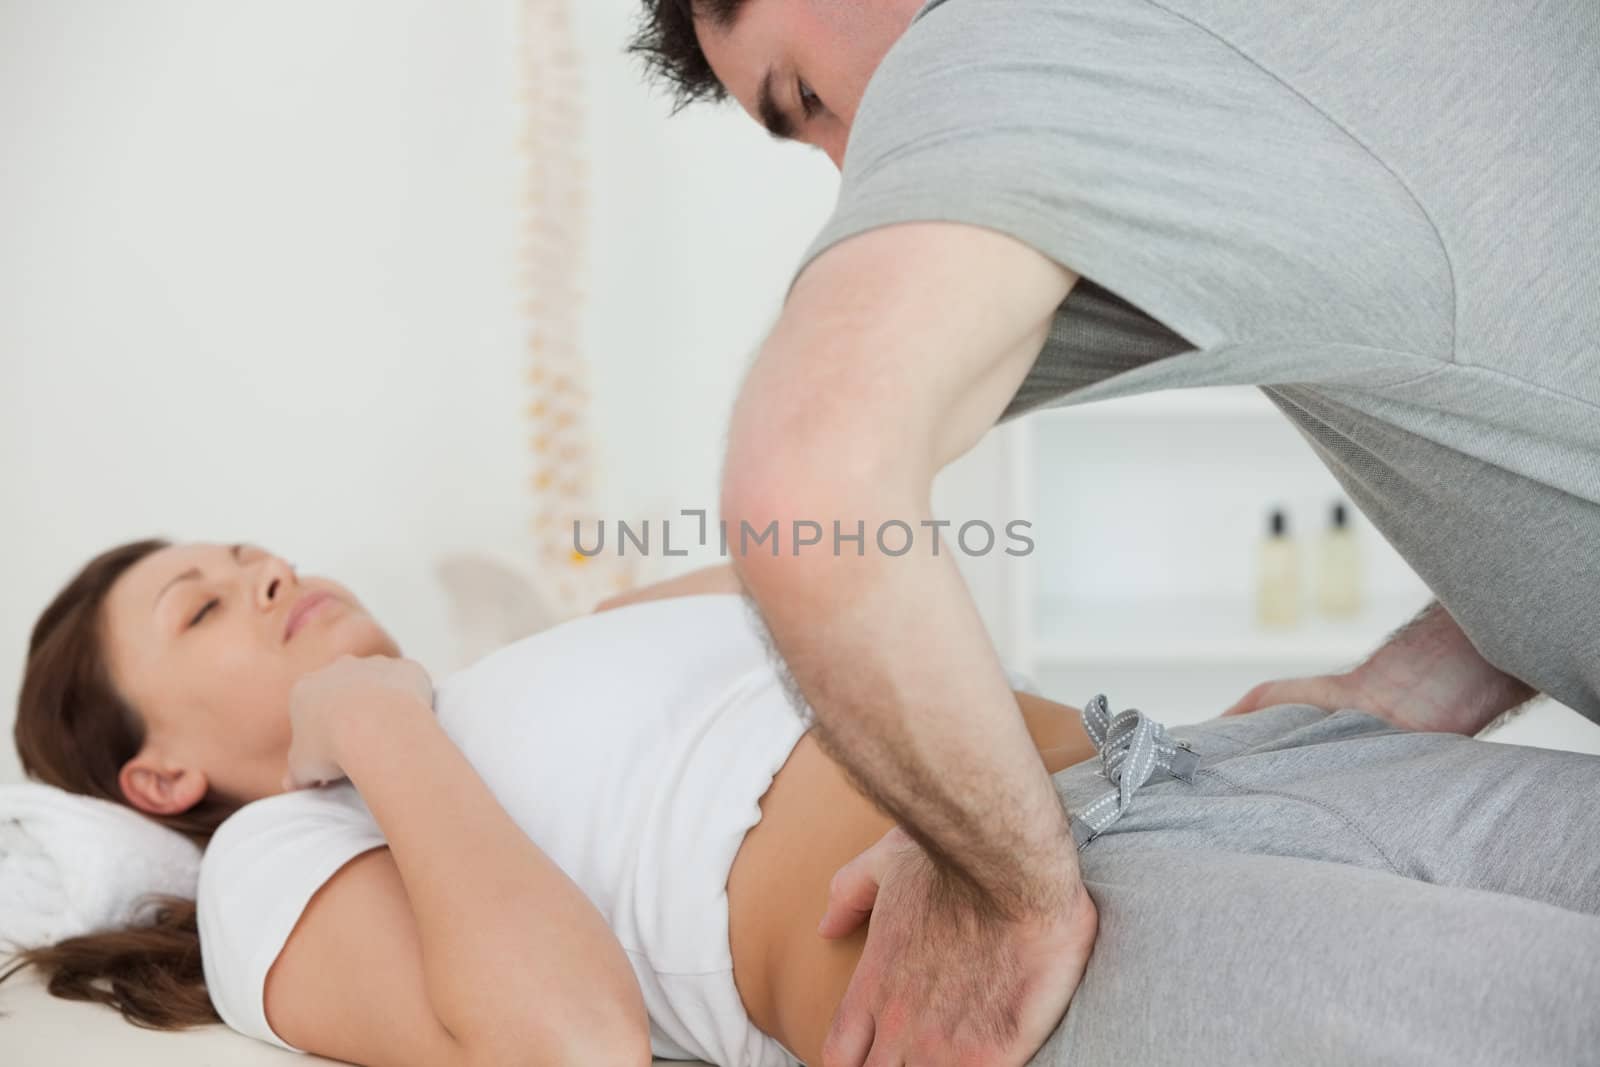 Woman lying while being examined in a room